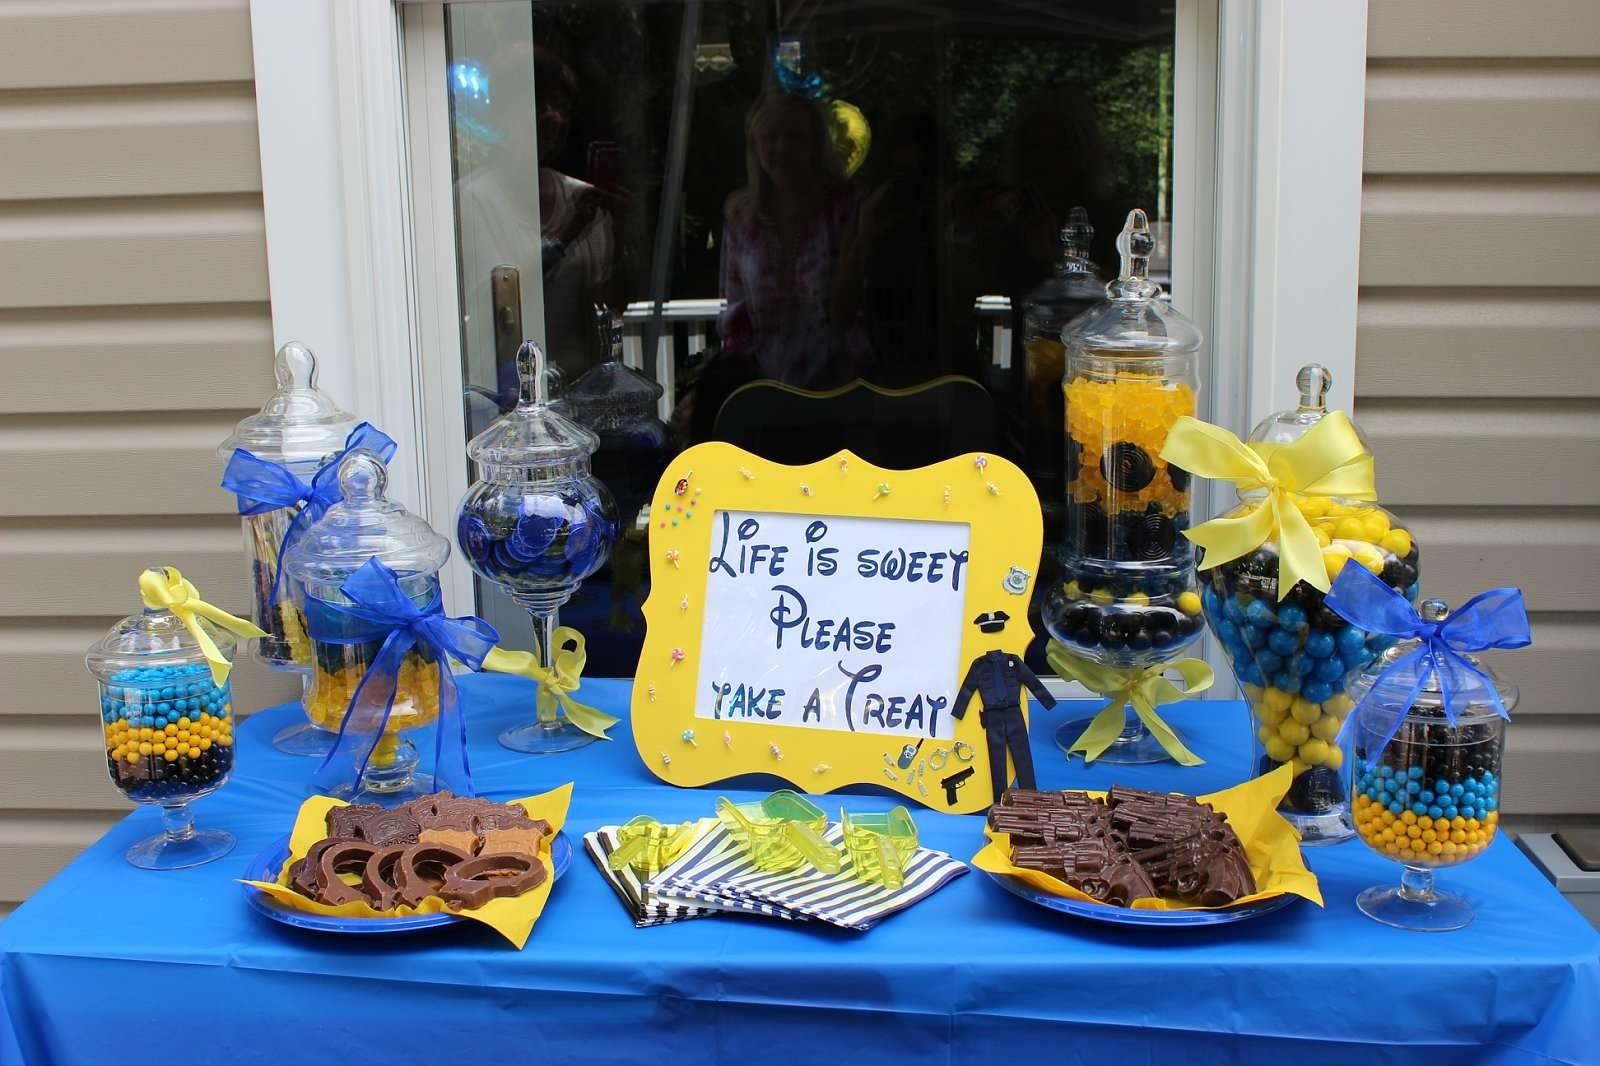 Police Officer Retirement Party Ideas
 Police party candy buffet Candy bar Black blue and yellow